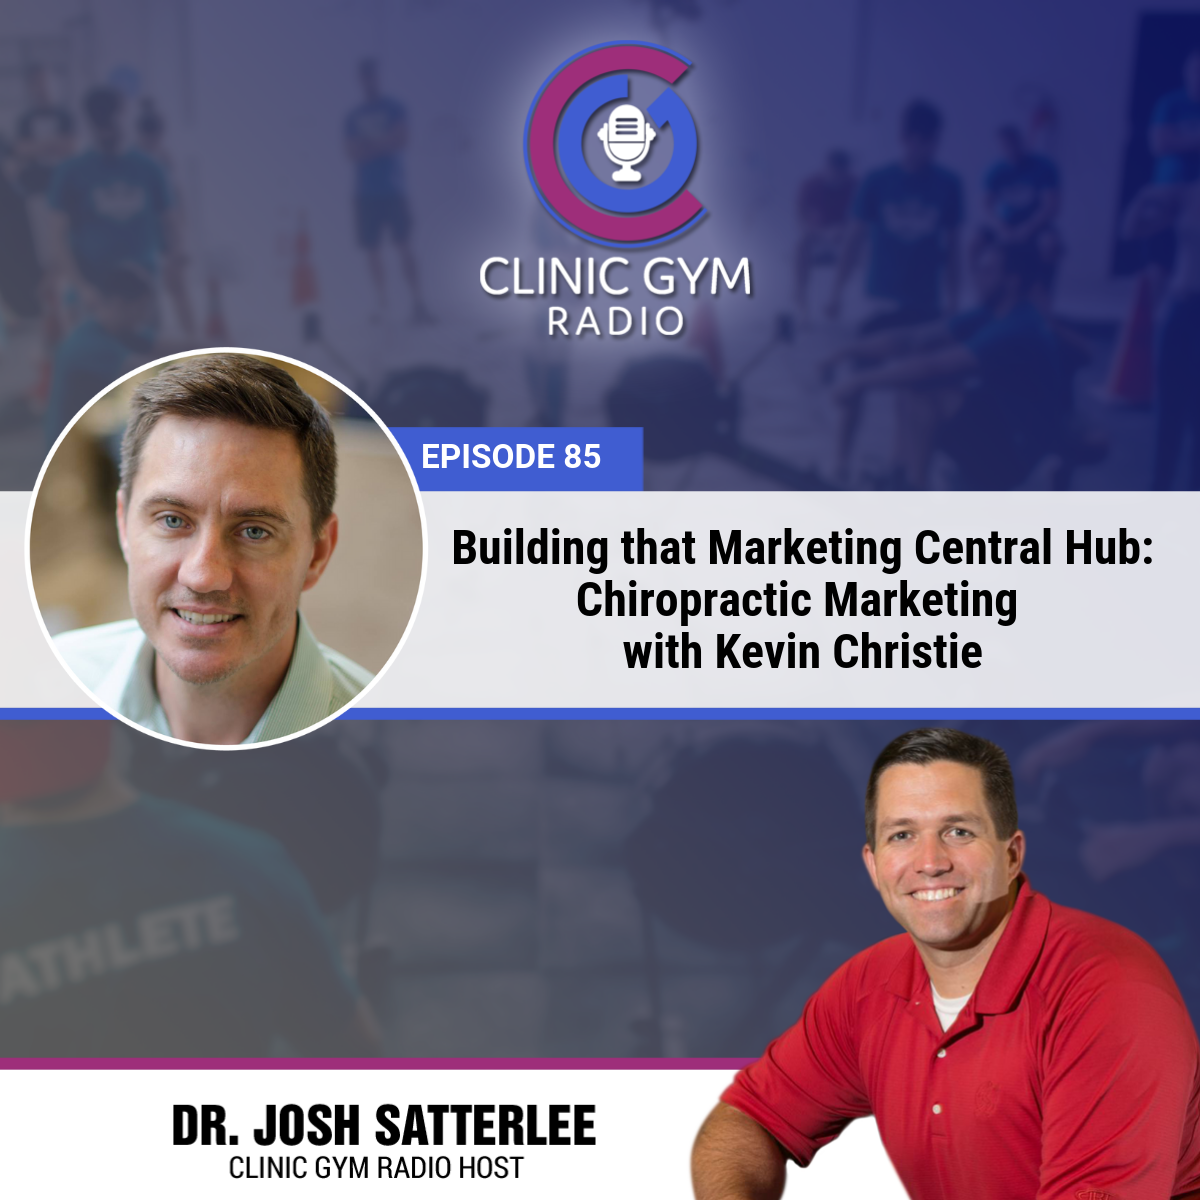 Building that Marketing Central Hub: Chiropractic Marketing with Kevin Christie